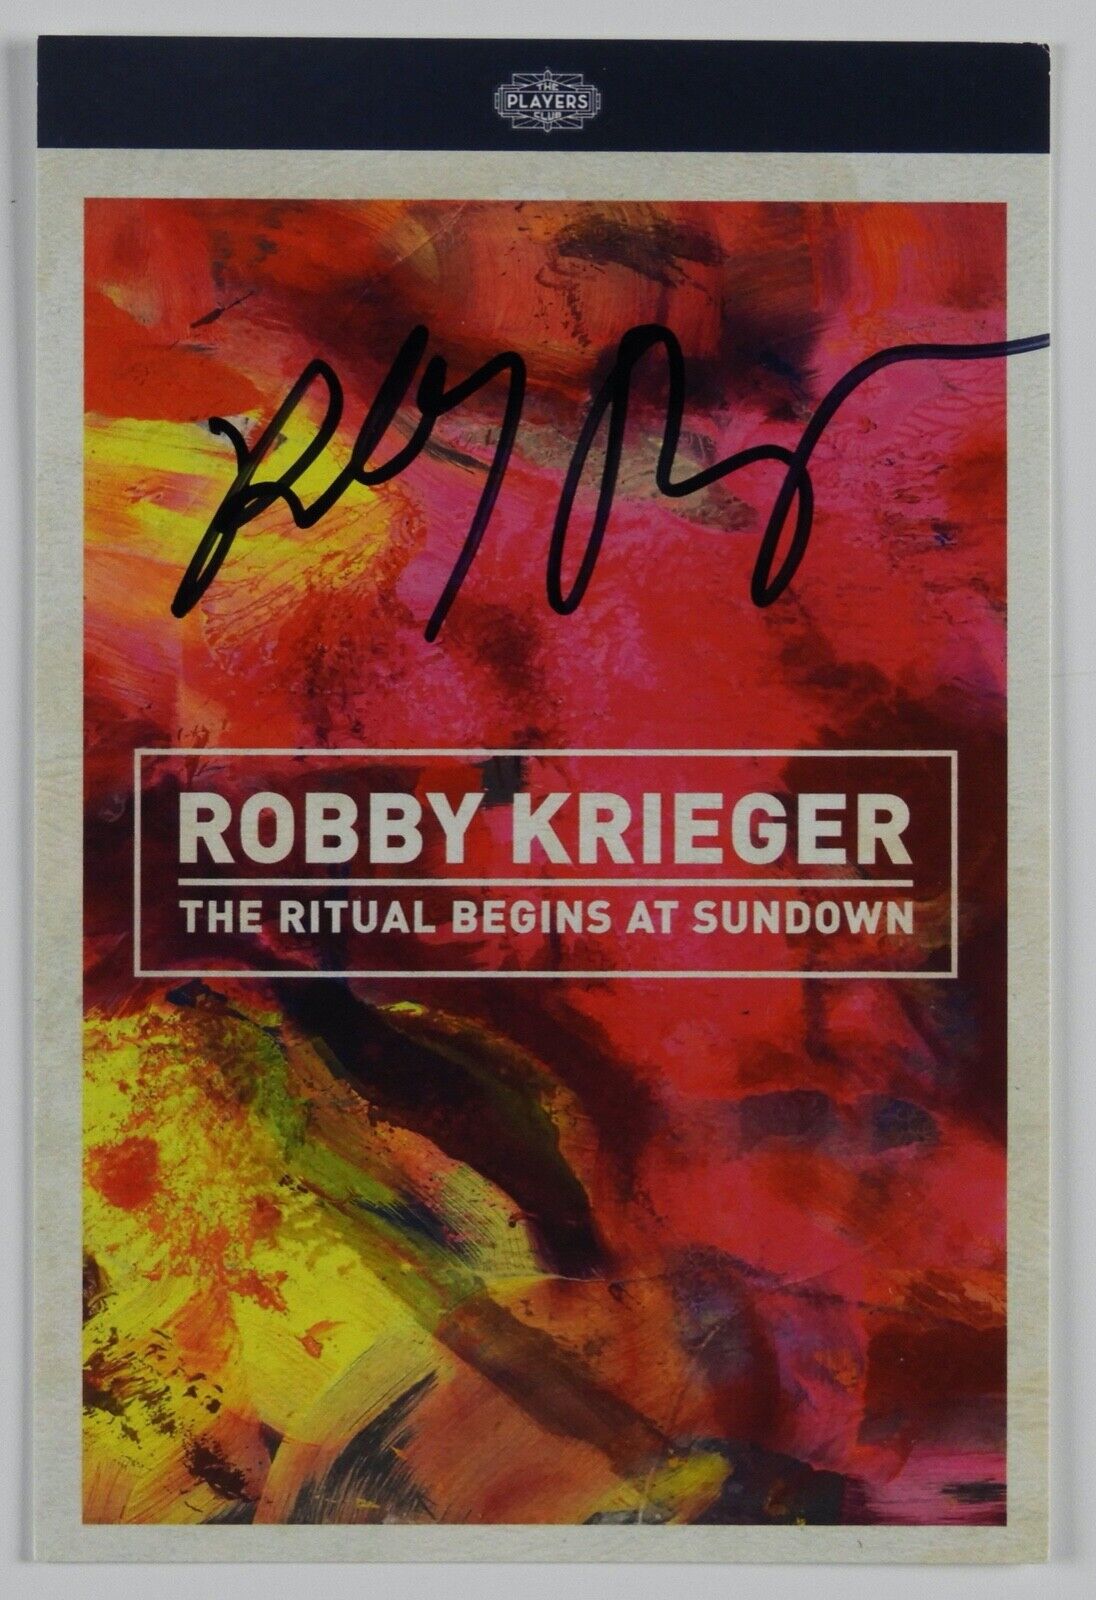 Robby Krieger The Doors JSA Signed Autograph CD Insert Card The Ritual Begins